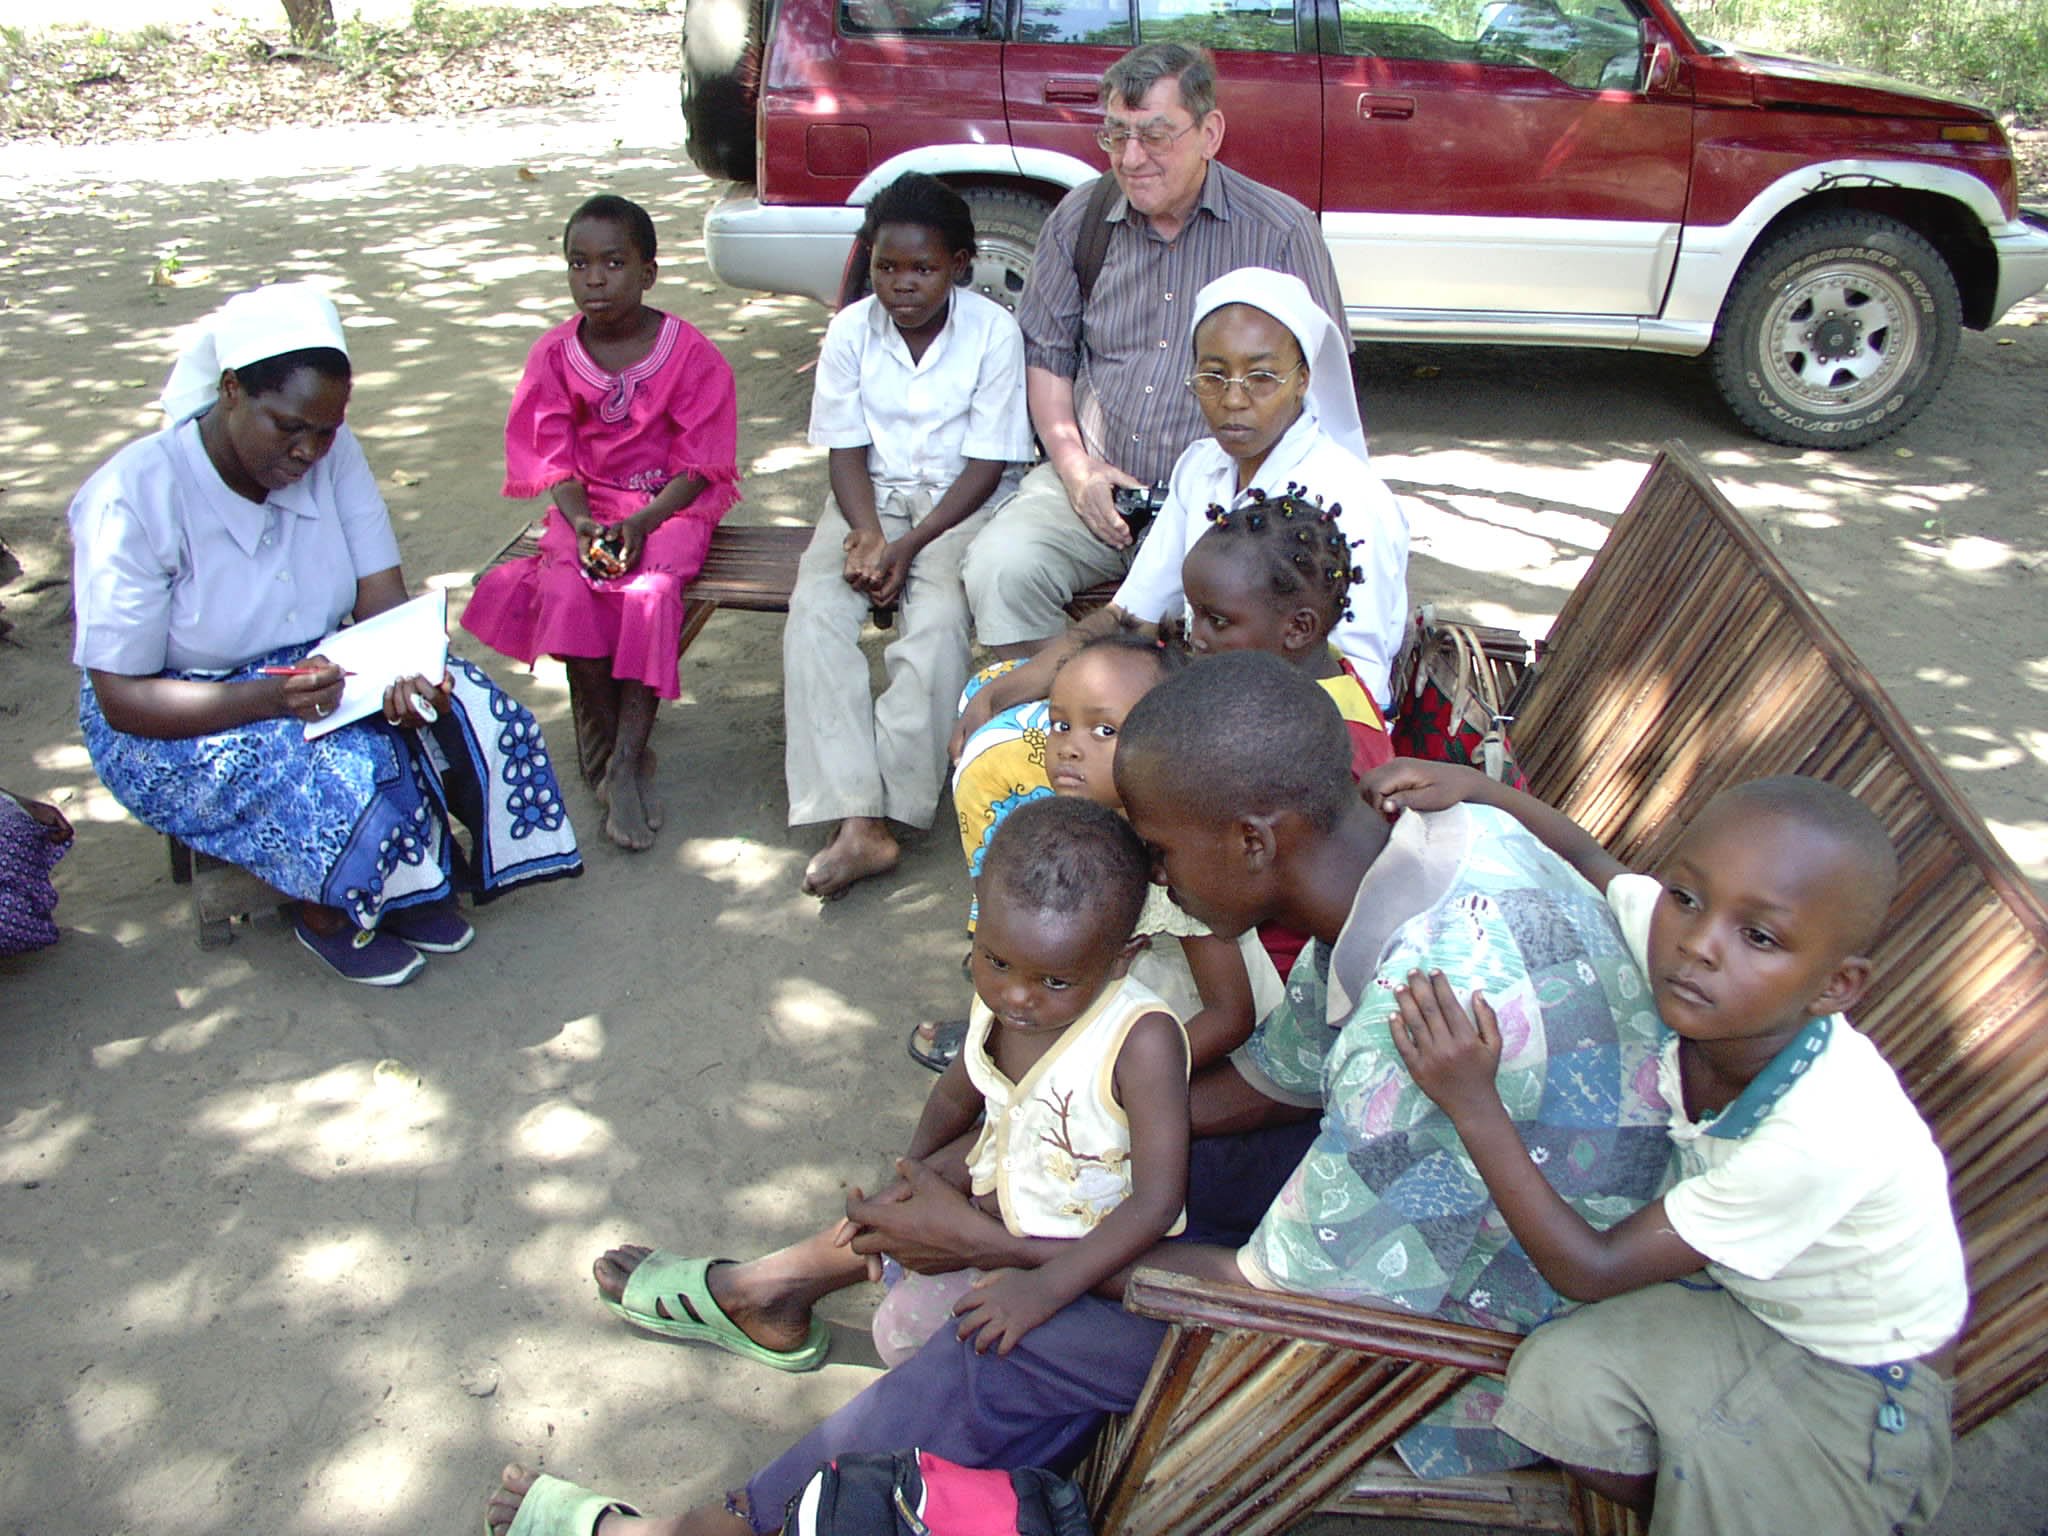 Visit to the Aids orphan project in Baharini, Kenya.